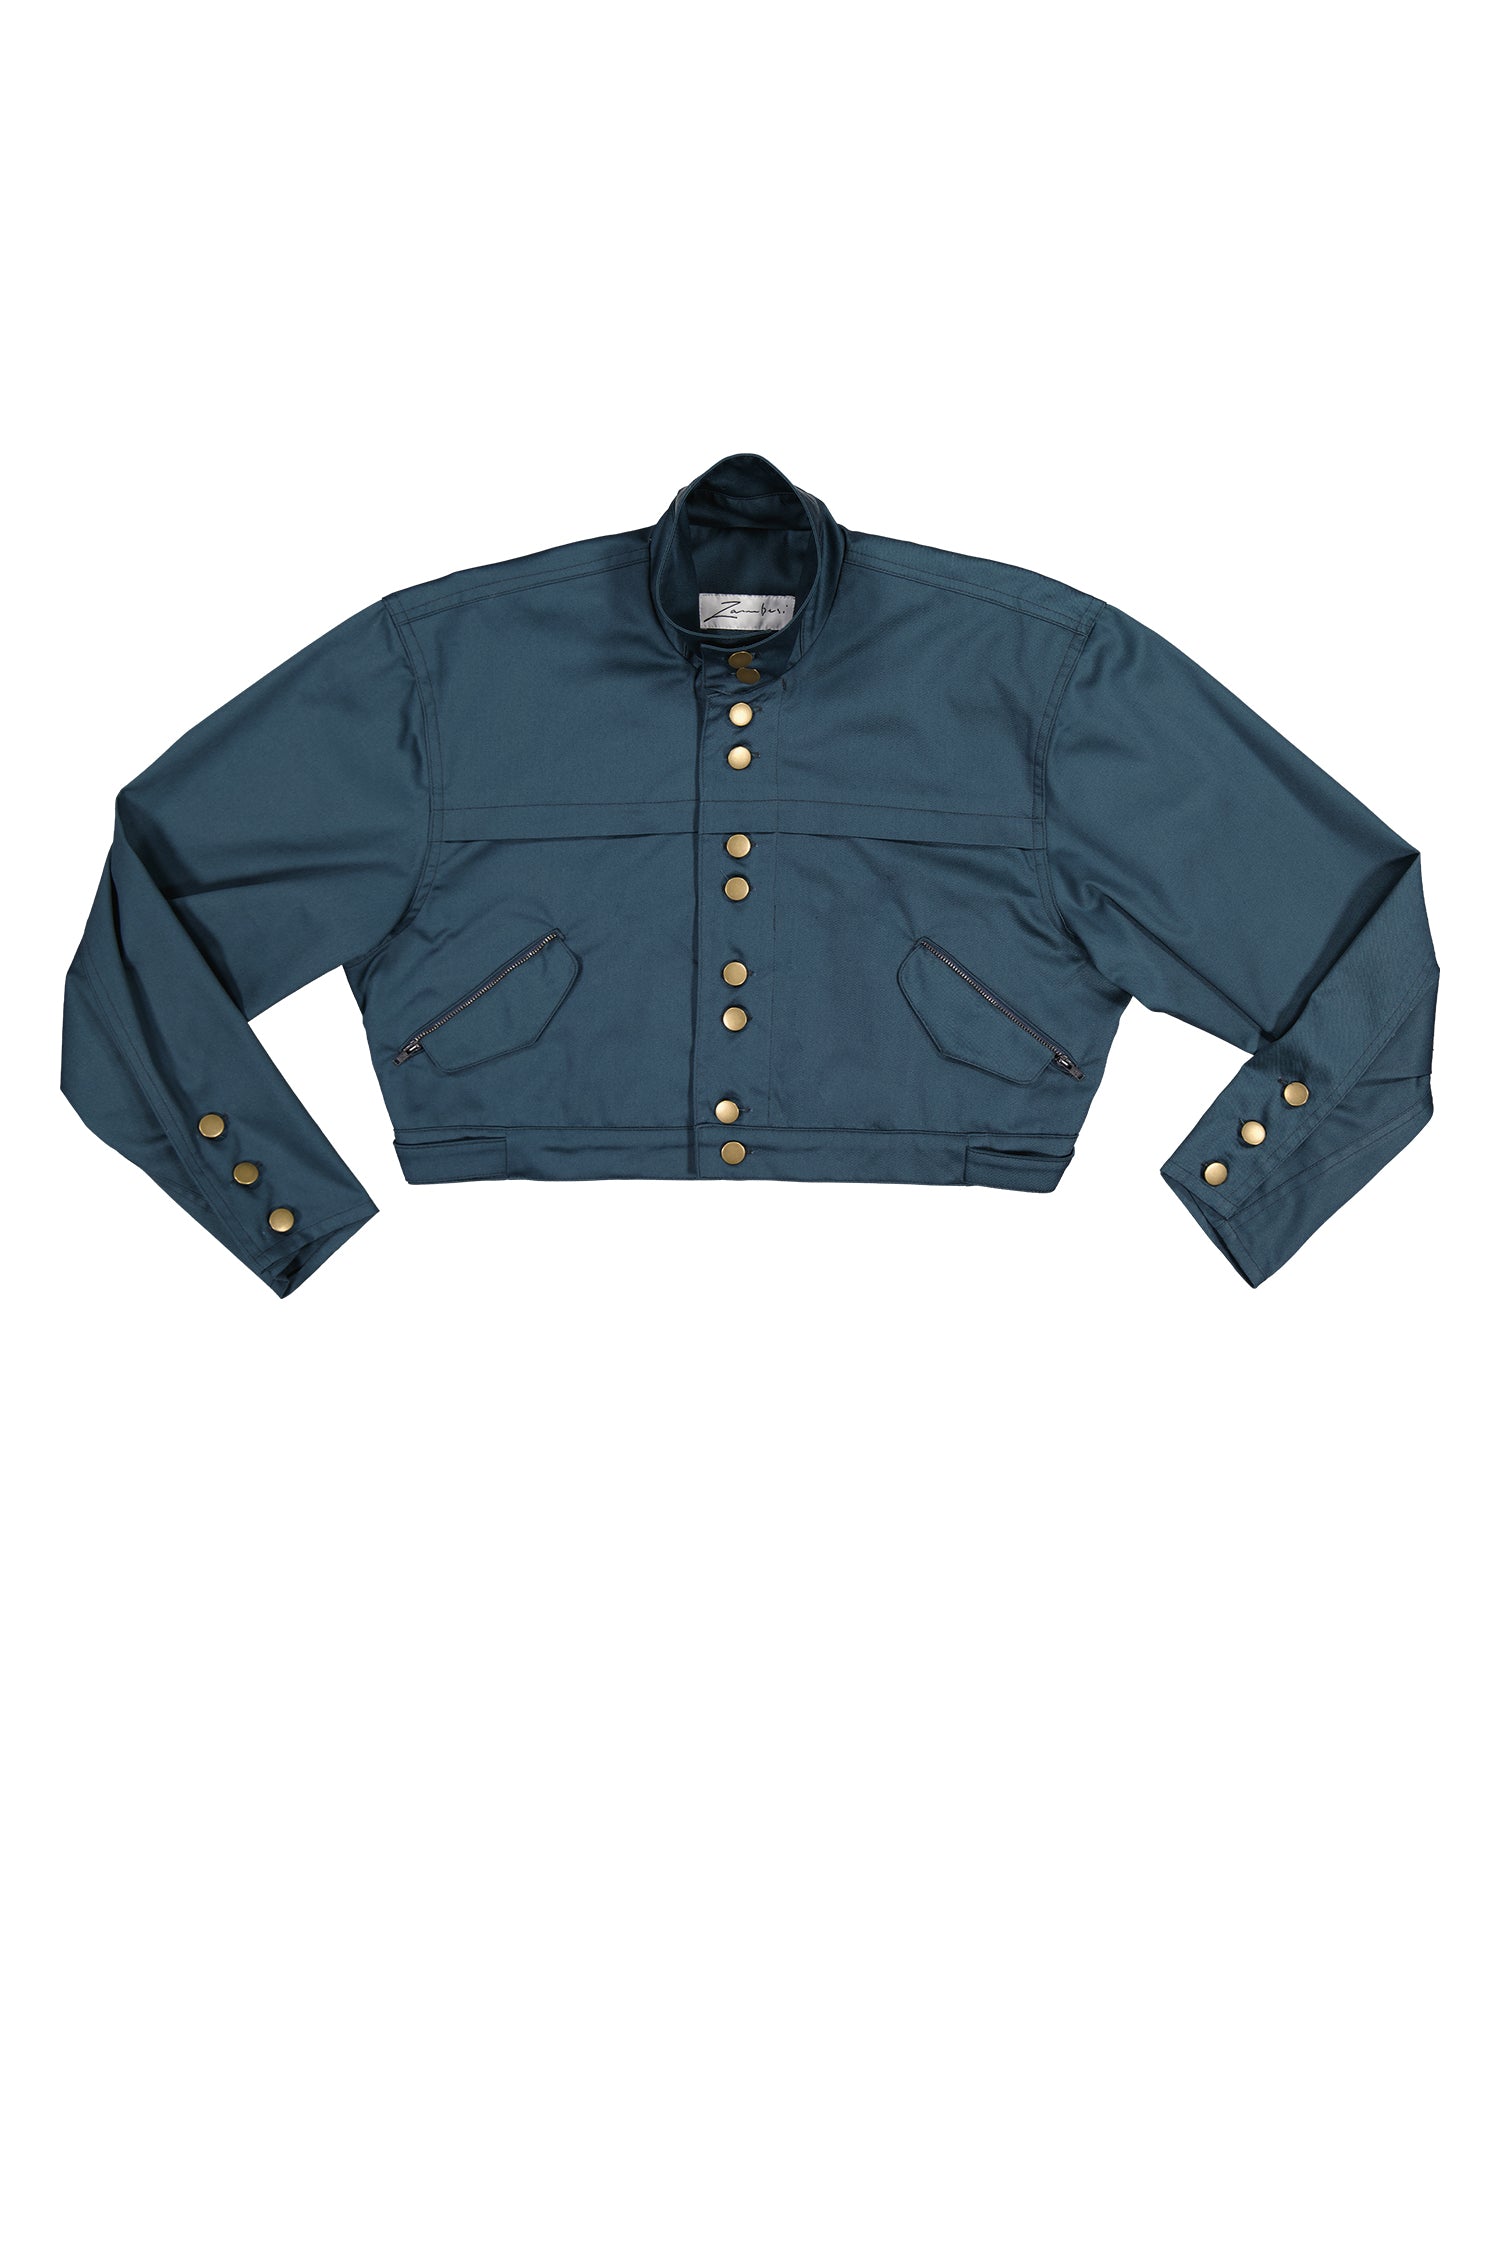 747 JACKET IN TEAL, S23